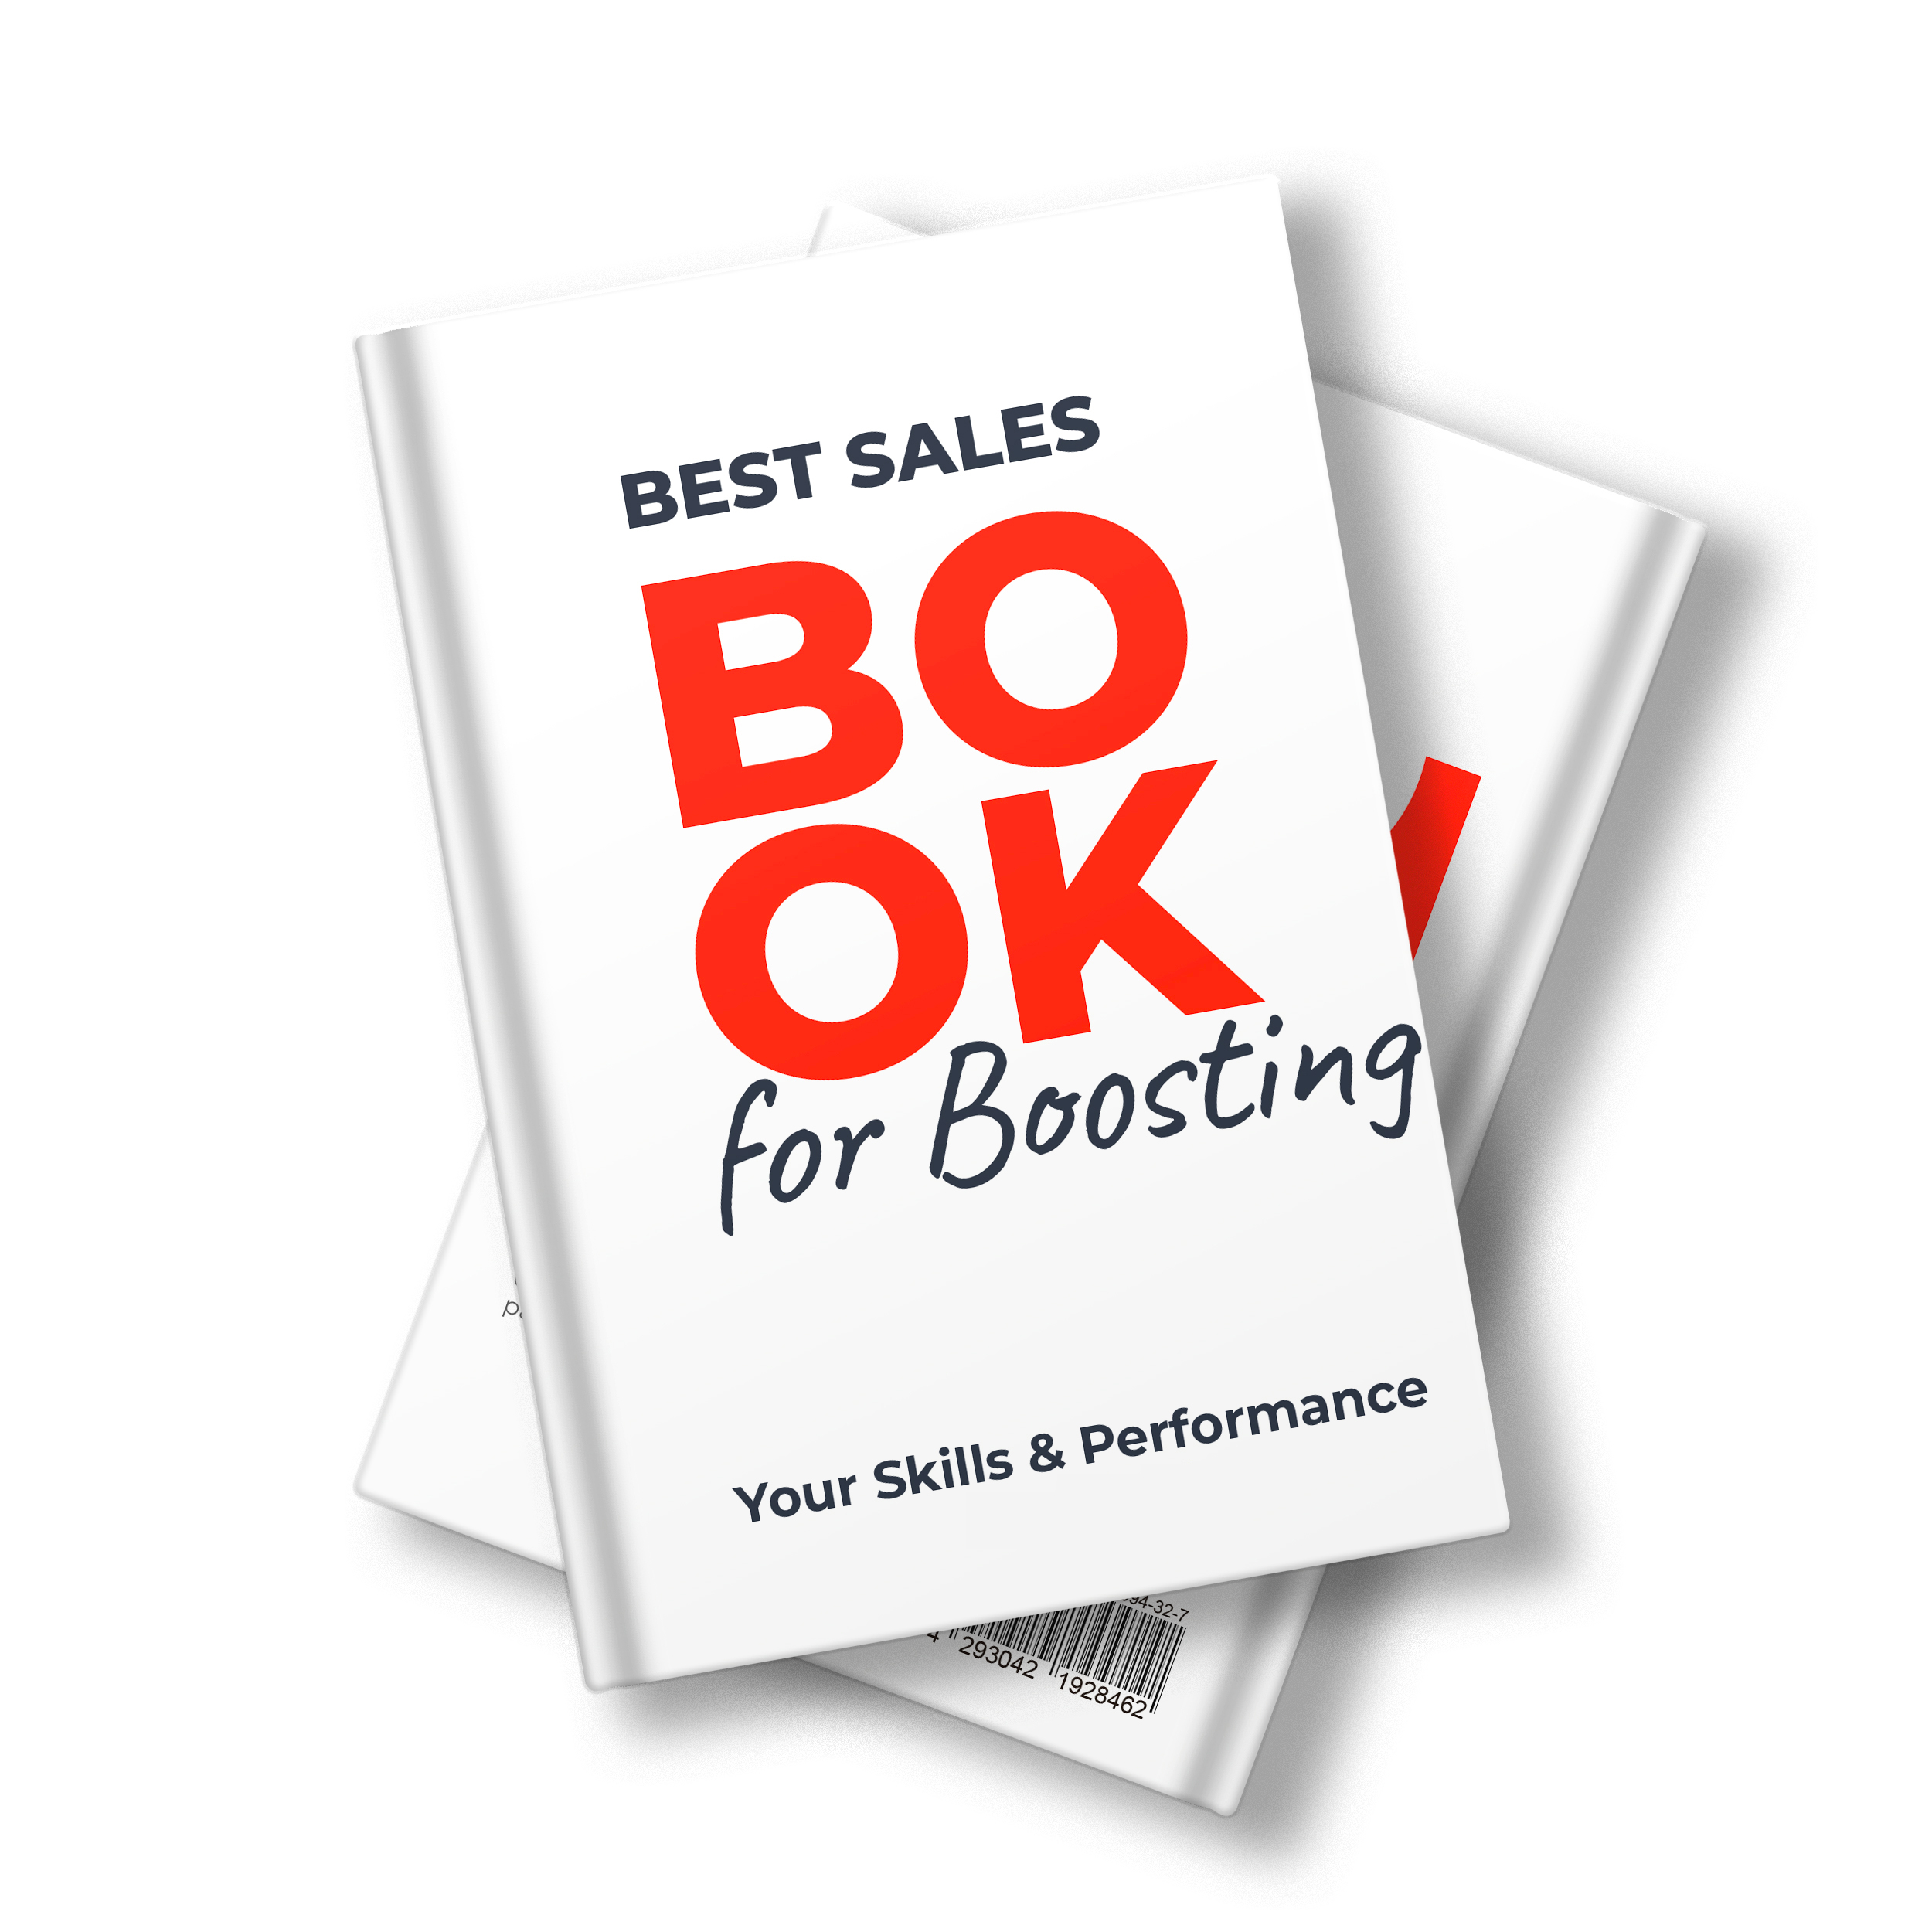 Best Sales Books To Boost Your Skills & Performance